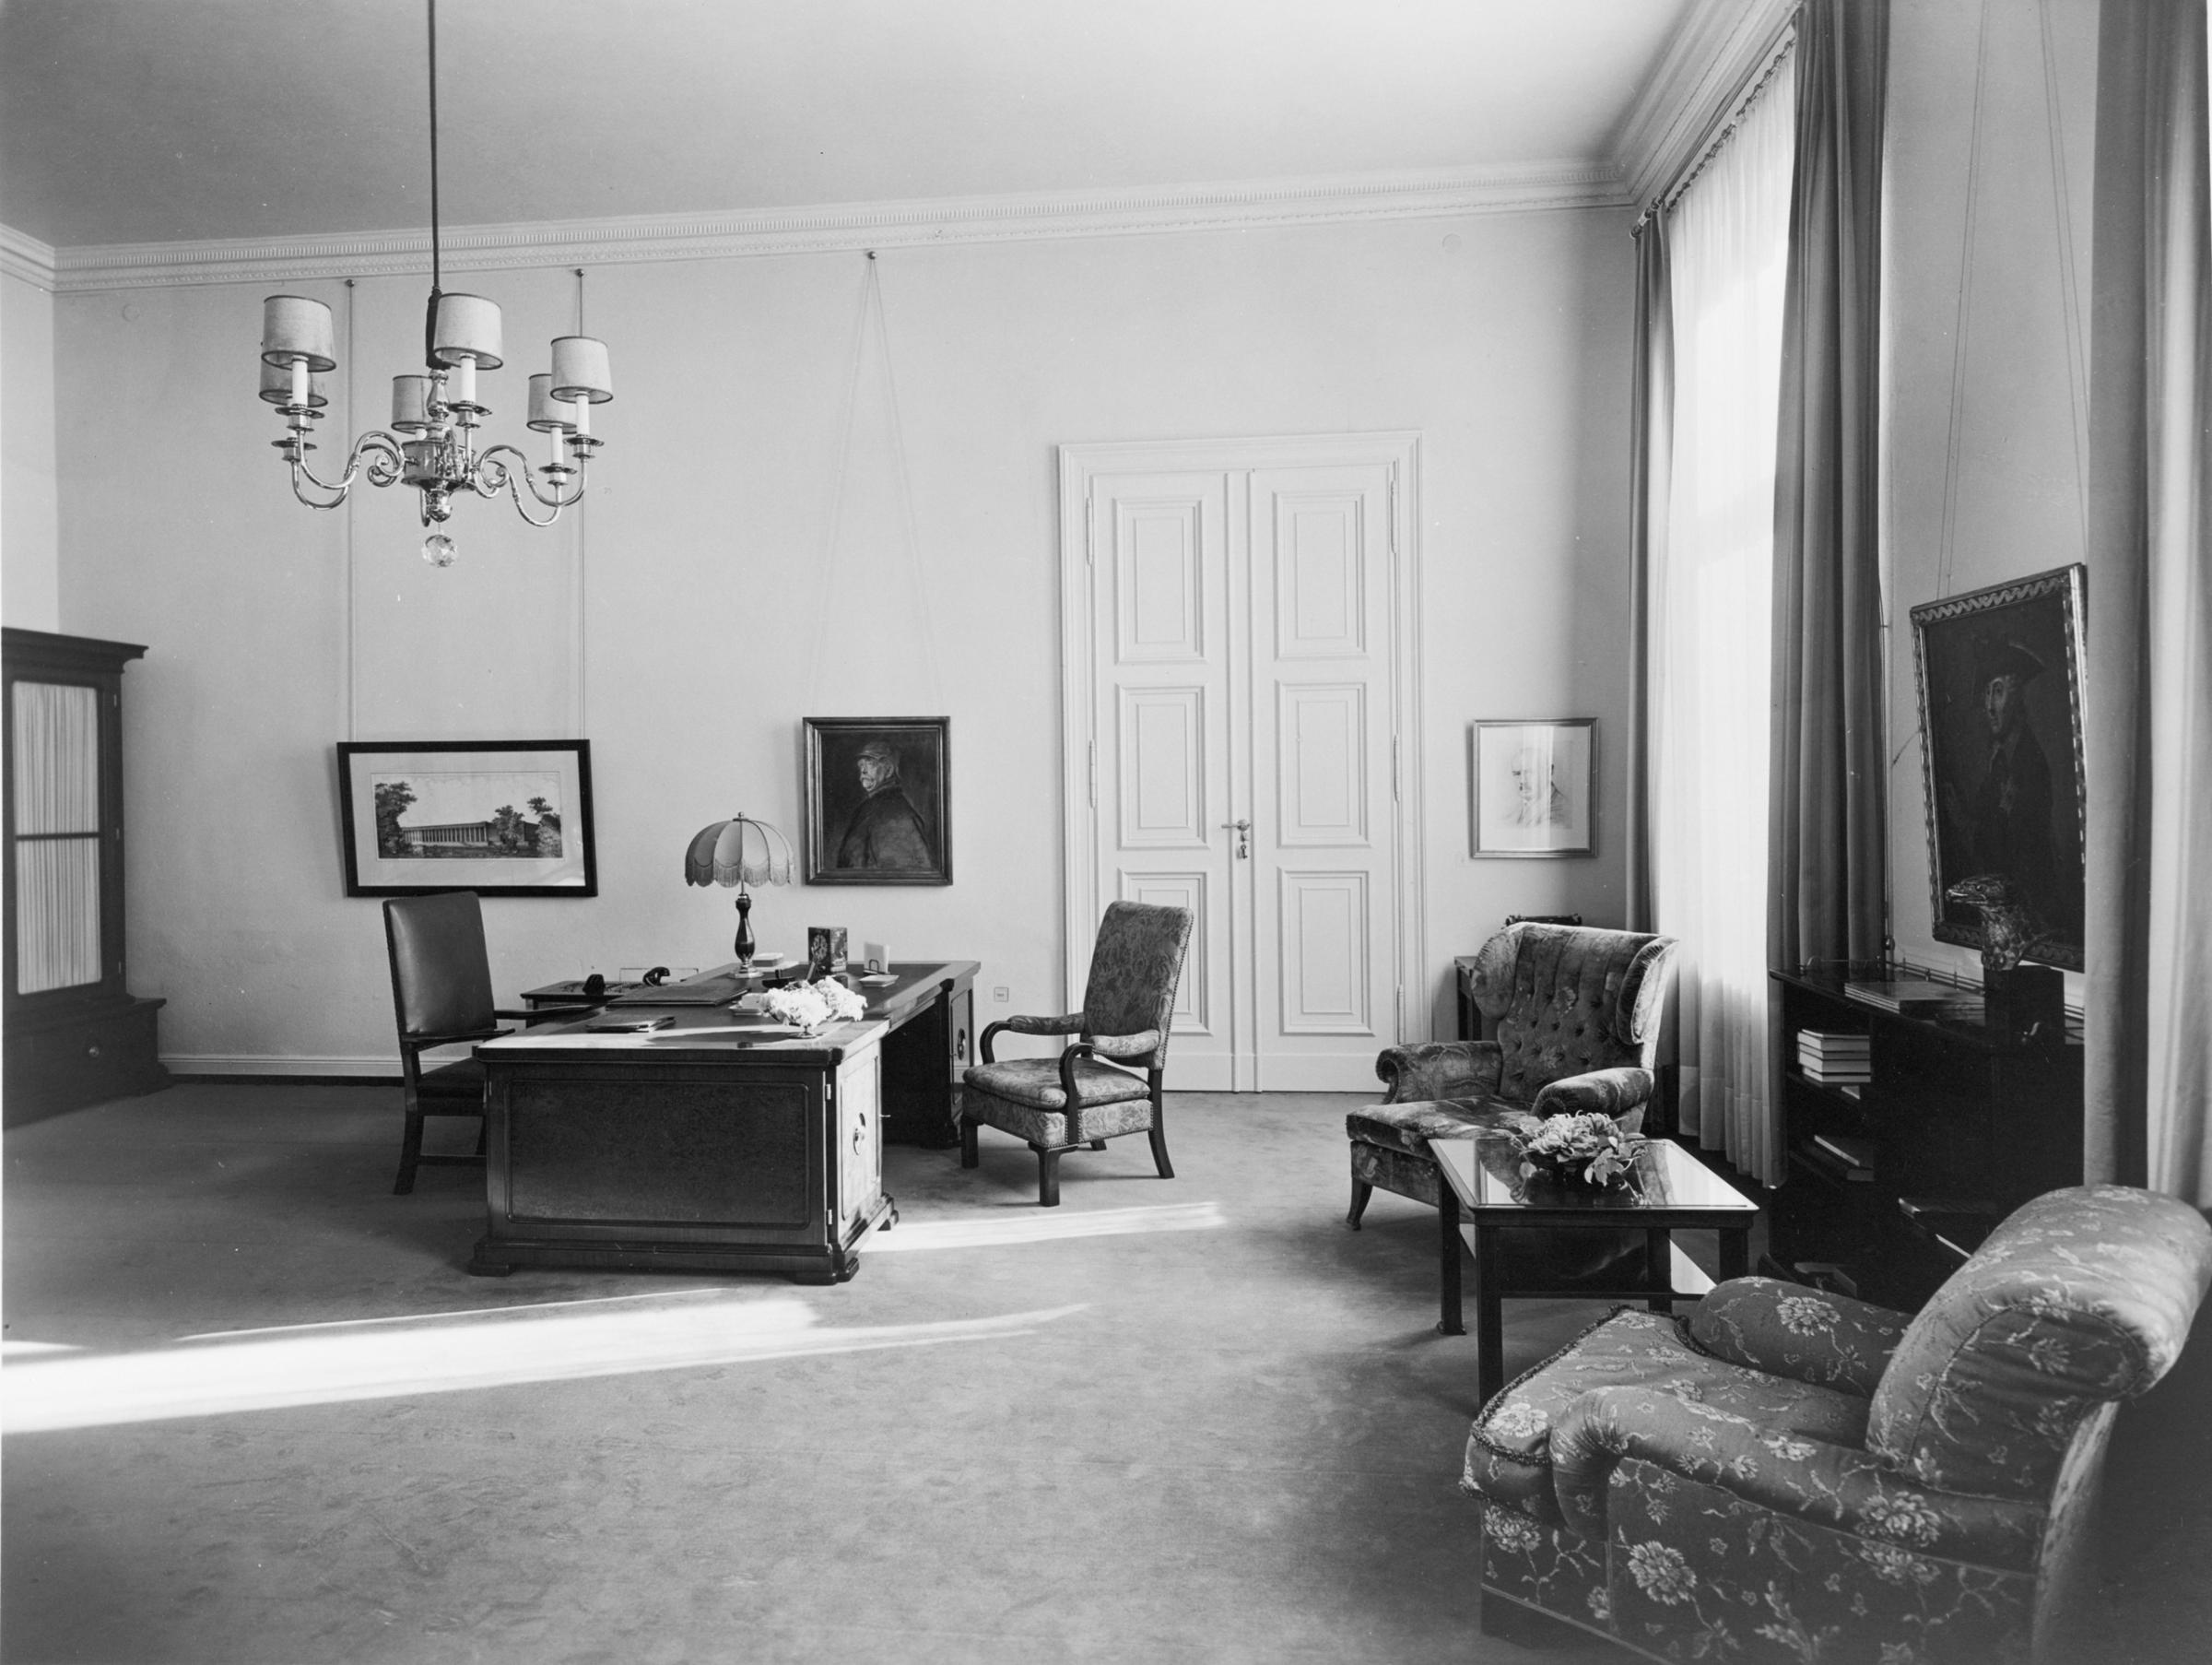 Heinrich Hoffmann, photograph of Hitler’s private study on the second floor of the Old Chancellery in Berlin after the 1934 renovation by the Atelier Troost